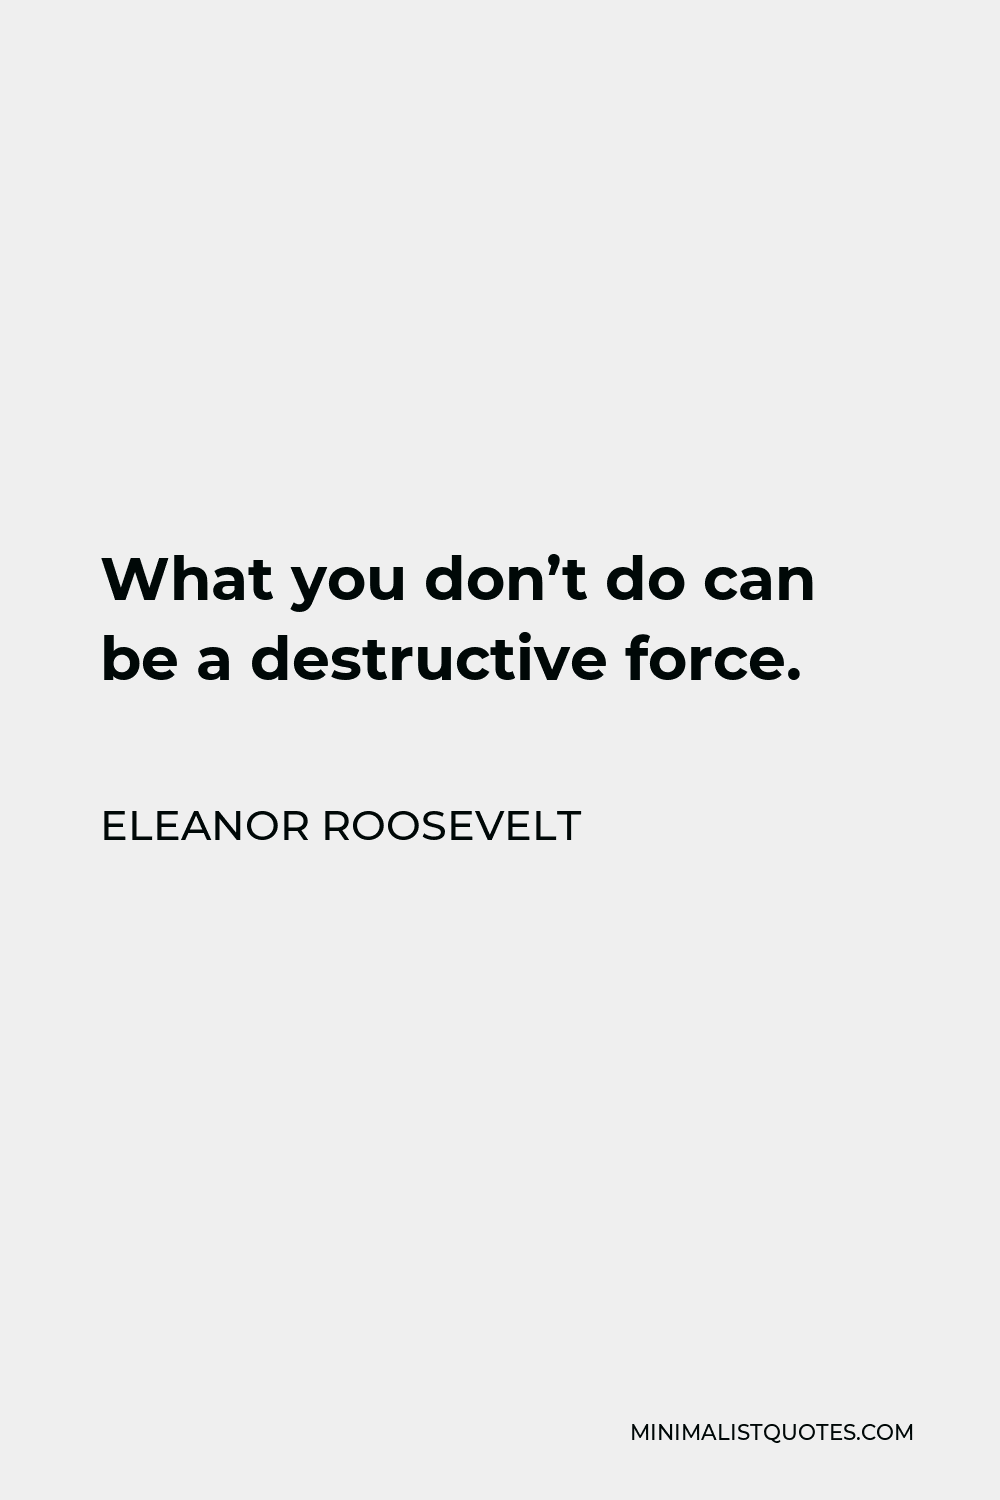 Eleanor Roosevelt Quote - What you don’t do can be a destructive force.